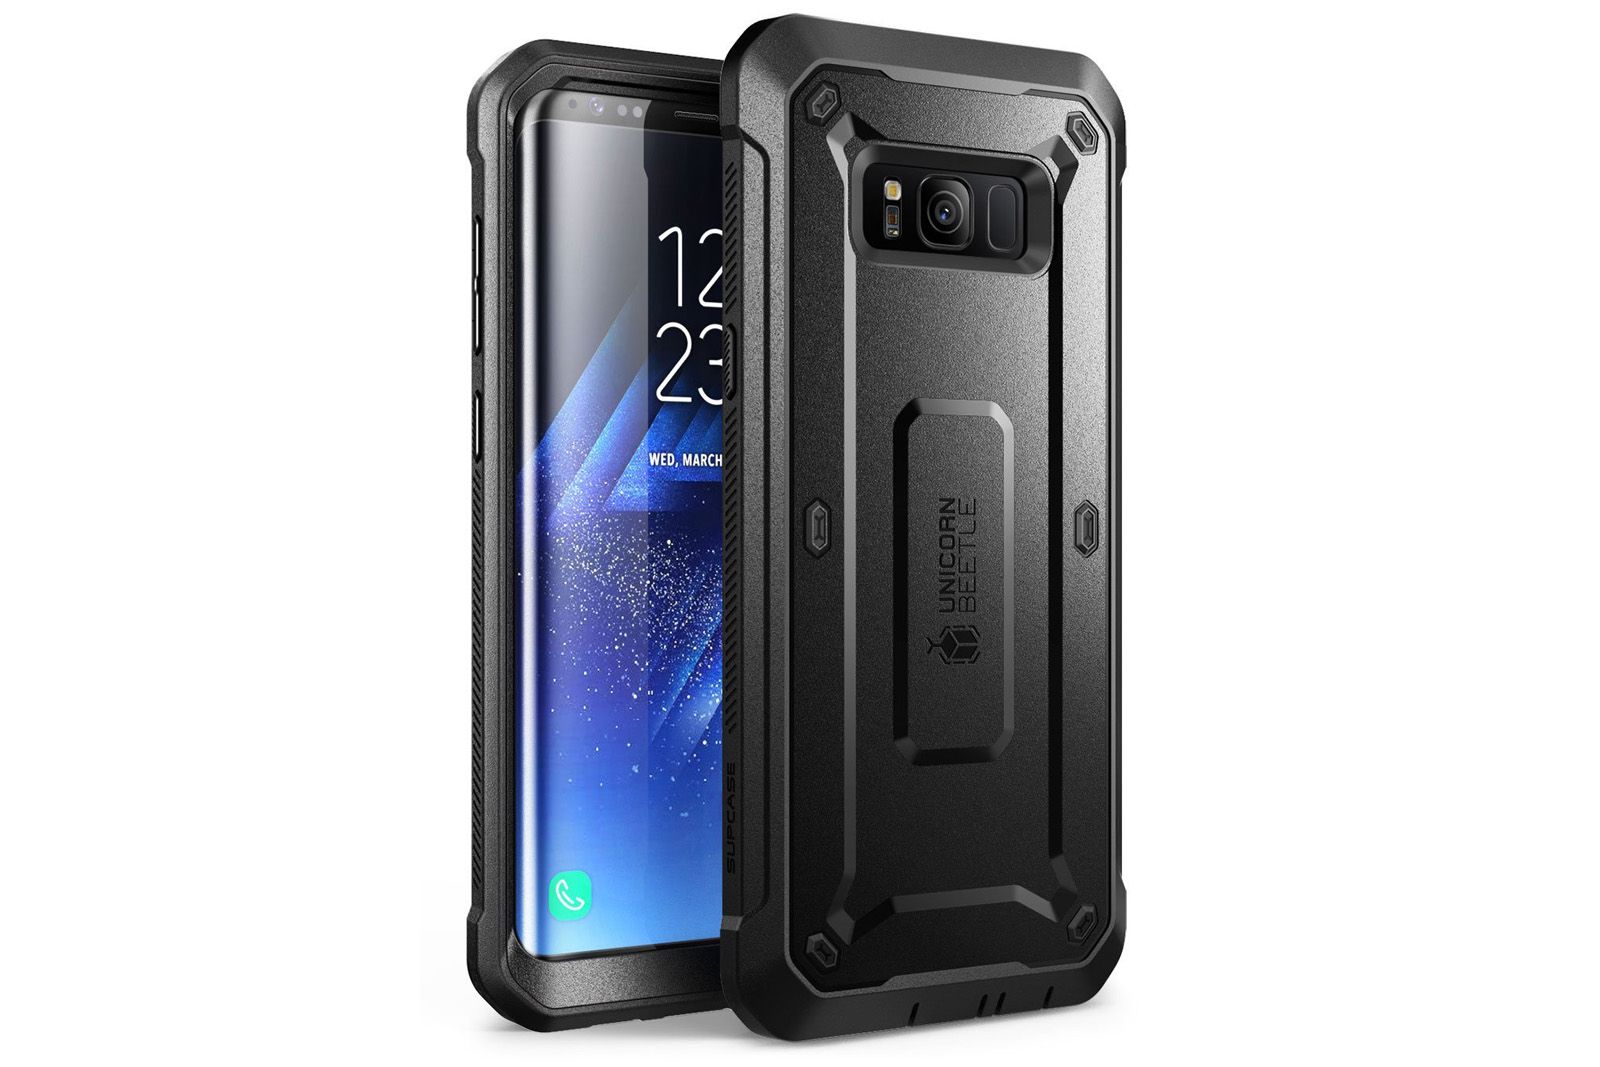 Best Galaxy S8 And S8 Plus Cases Protect Your New Samsung Smartphone image 1